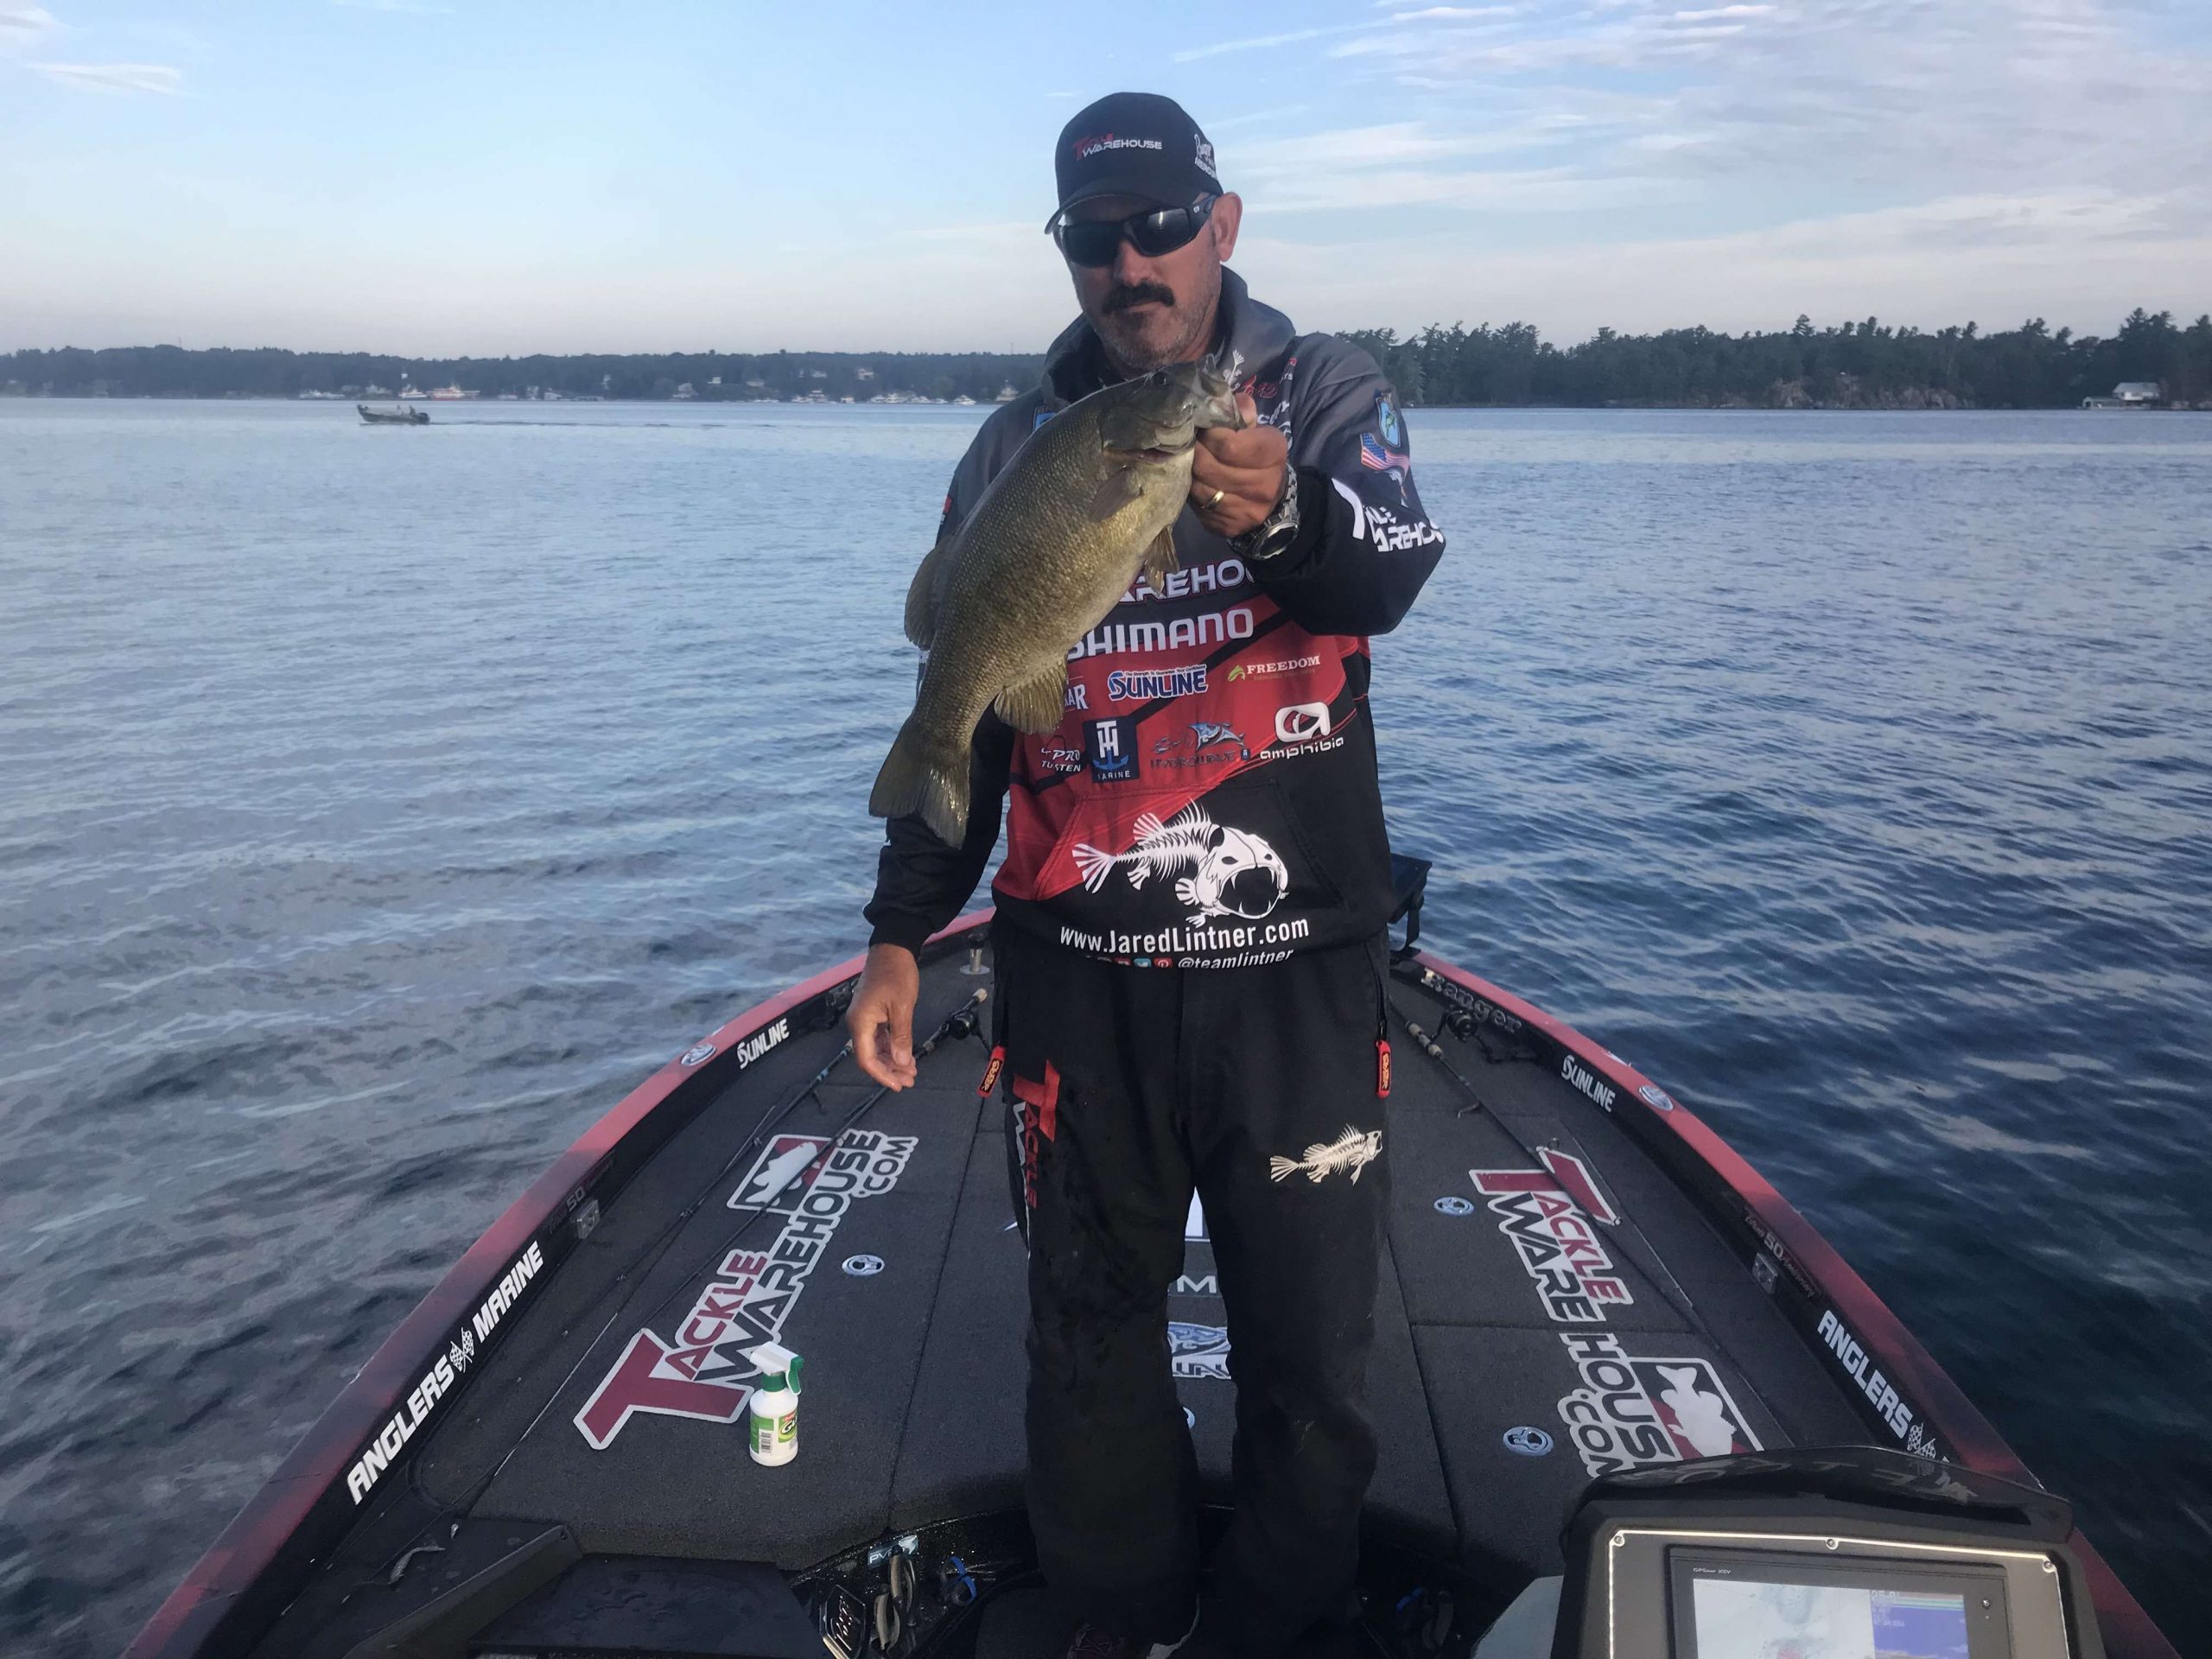 Jared Lintner with a nice 3.5 pounder to start the day.
